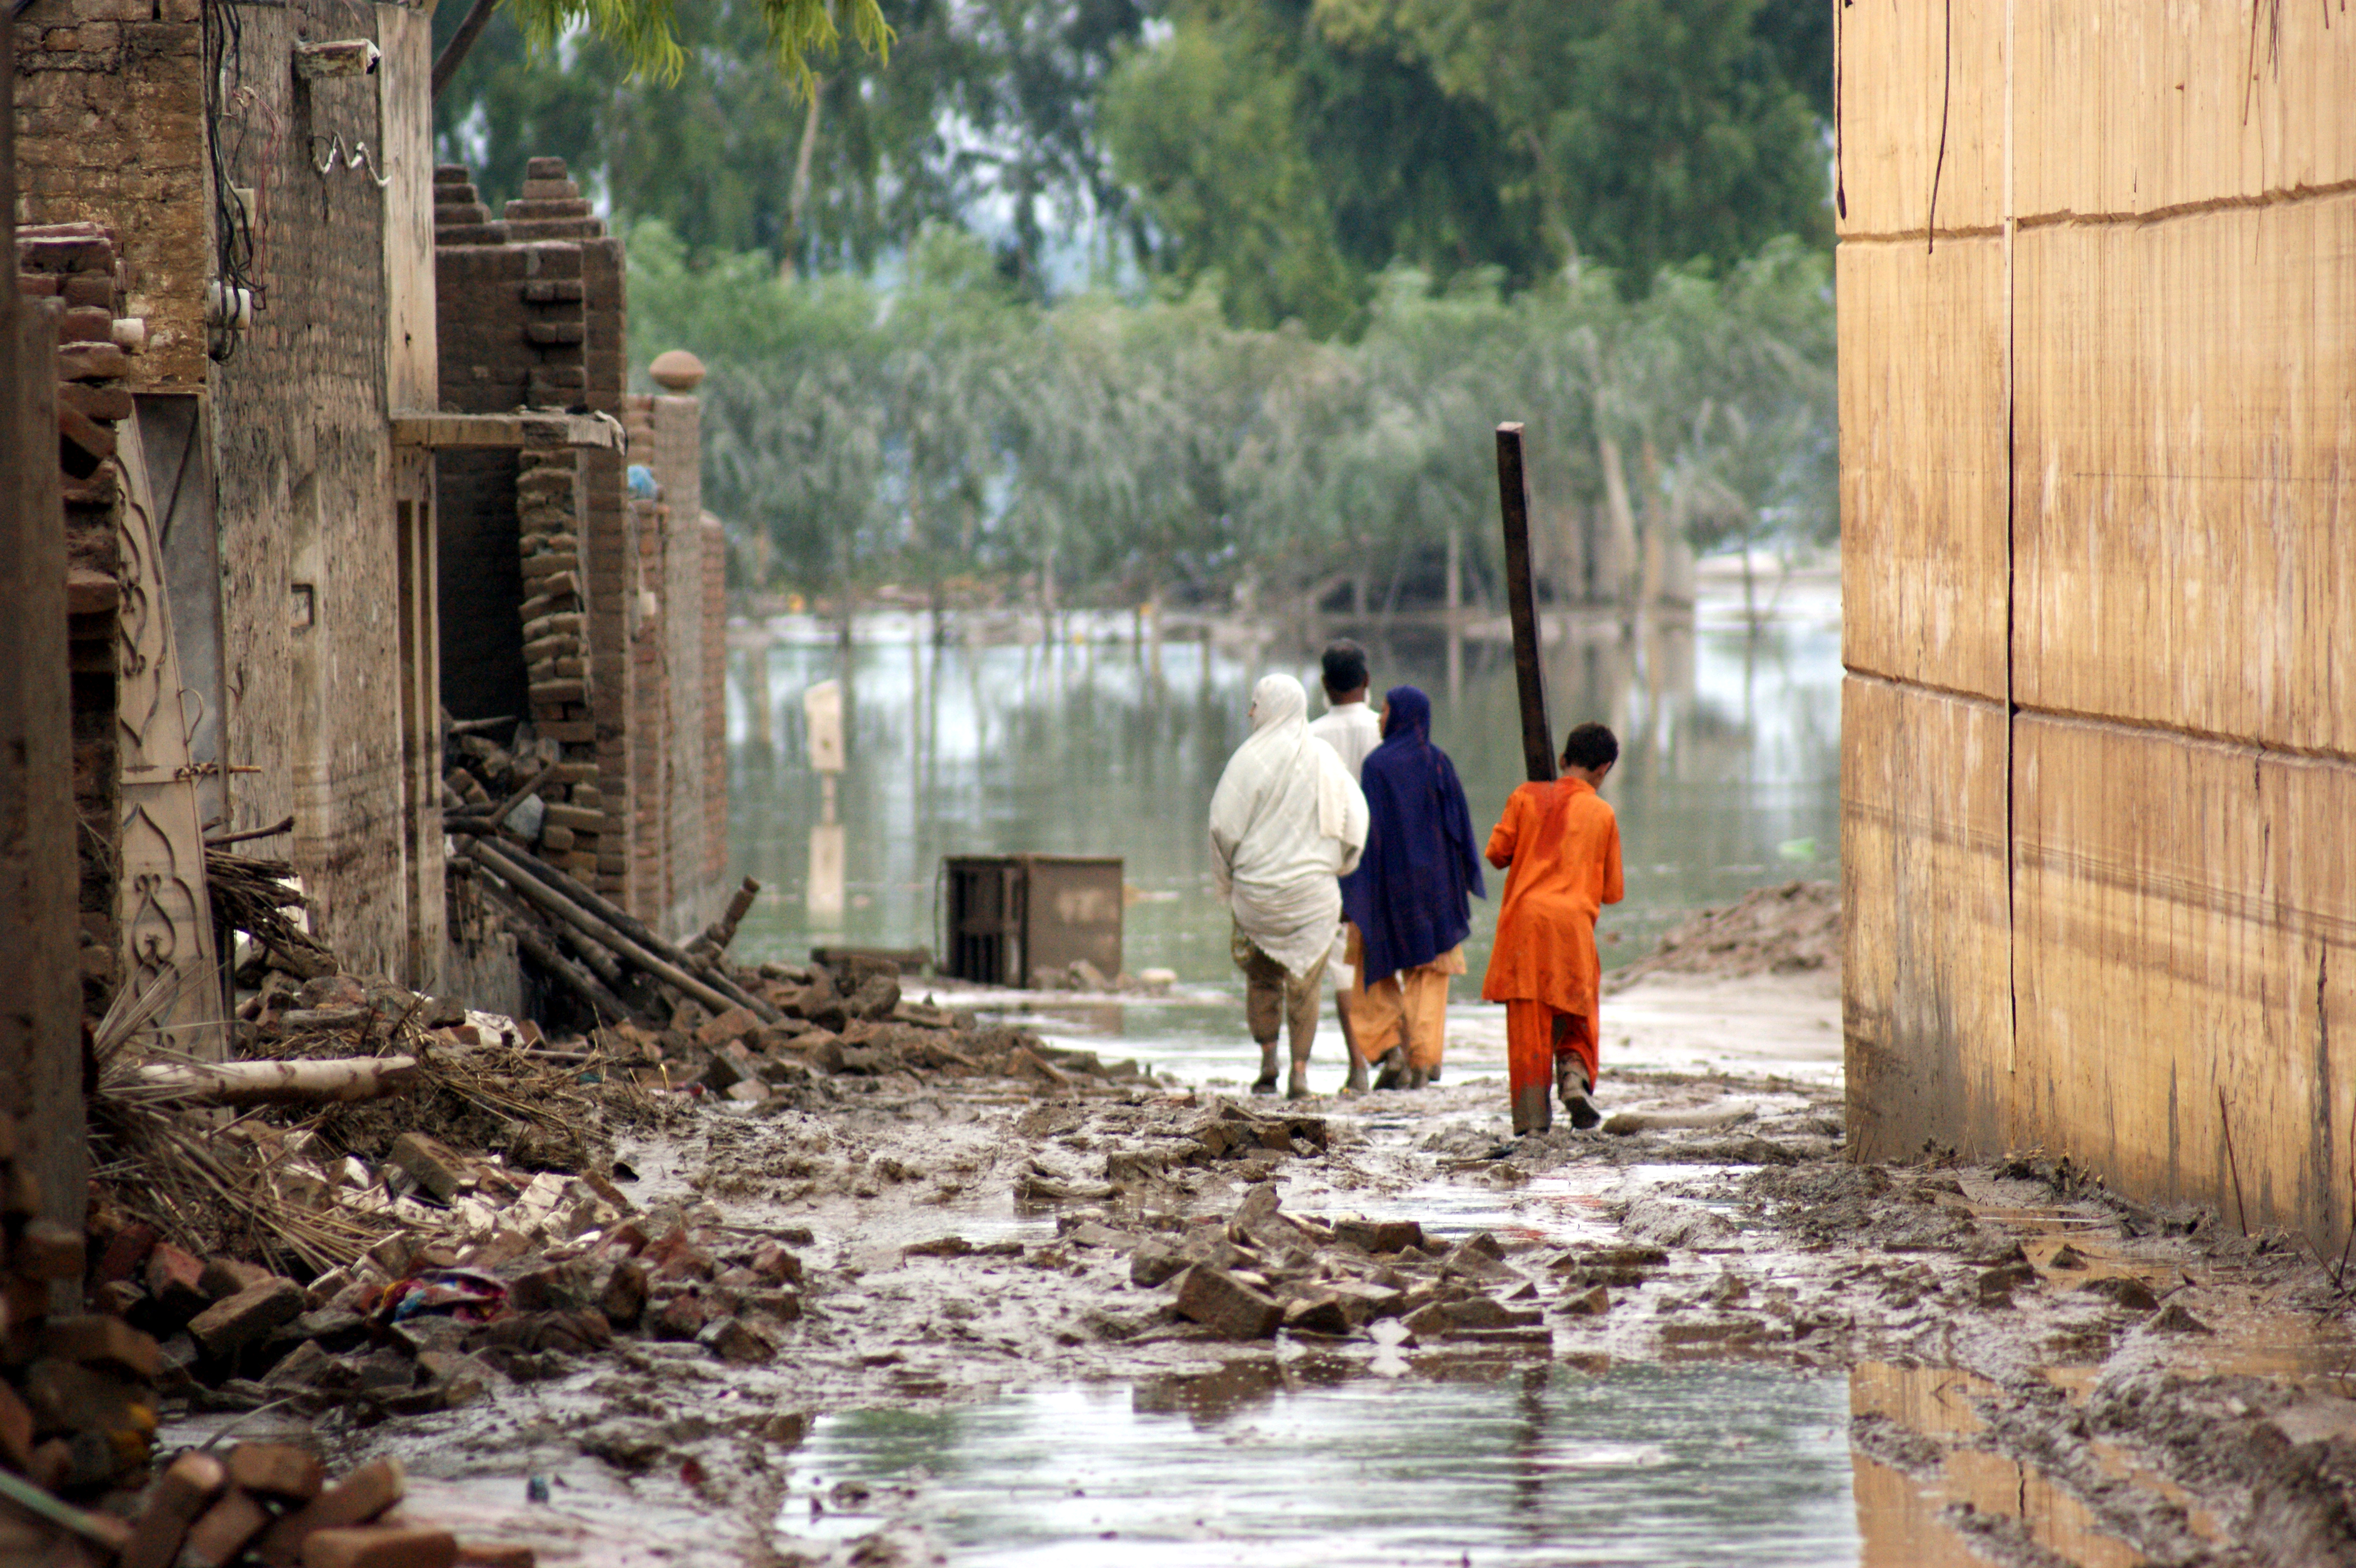 Flooded street in India